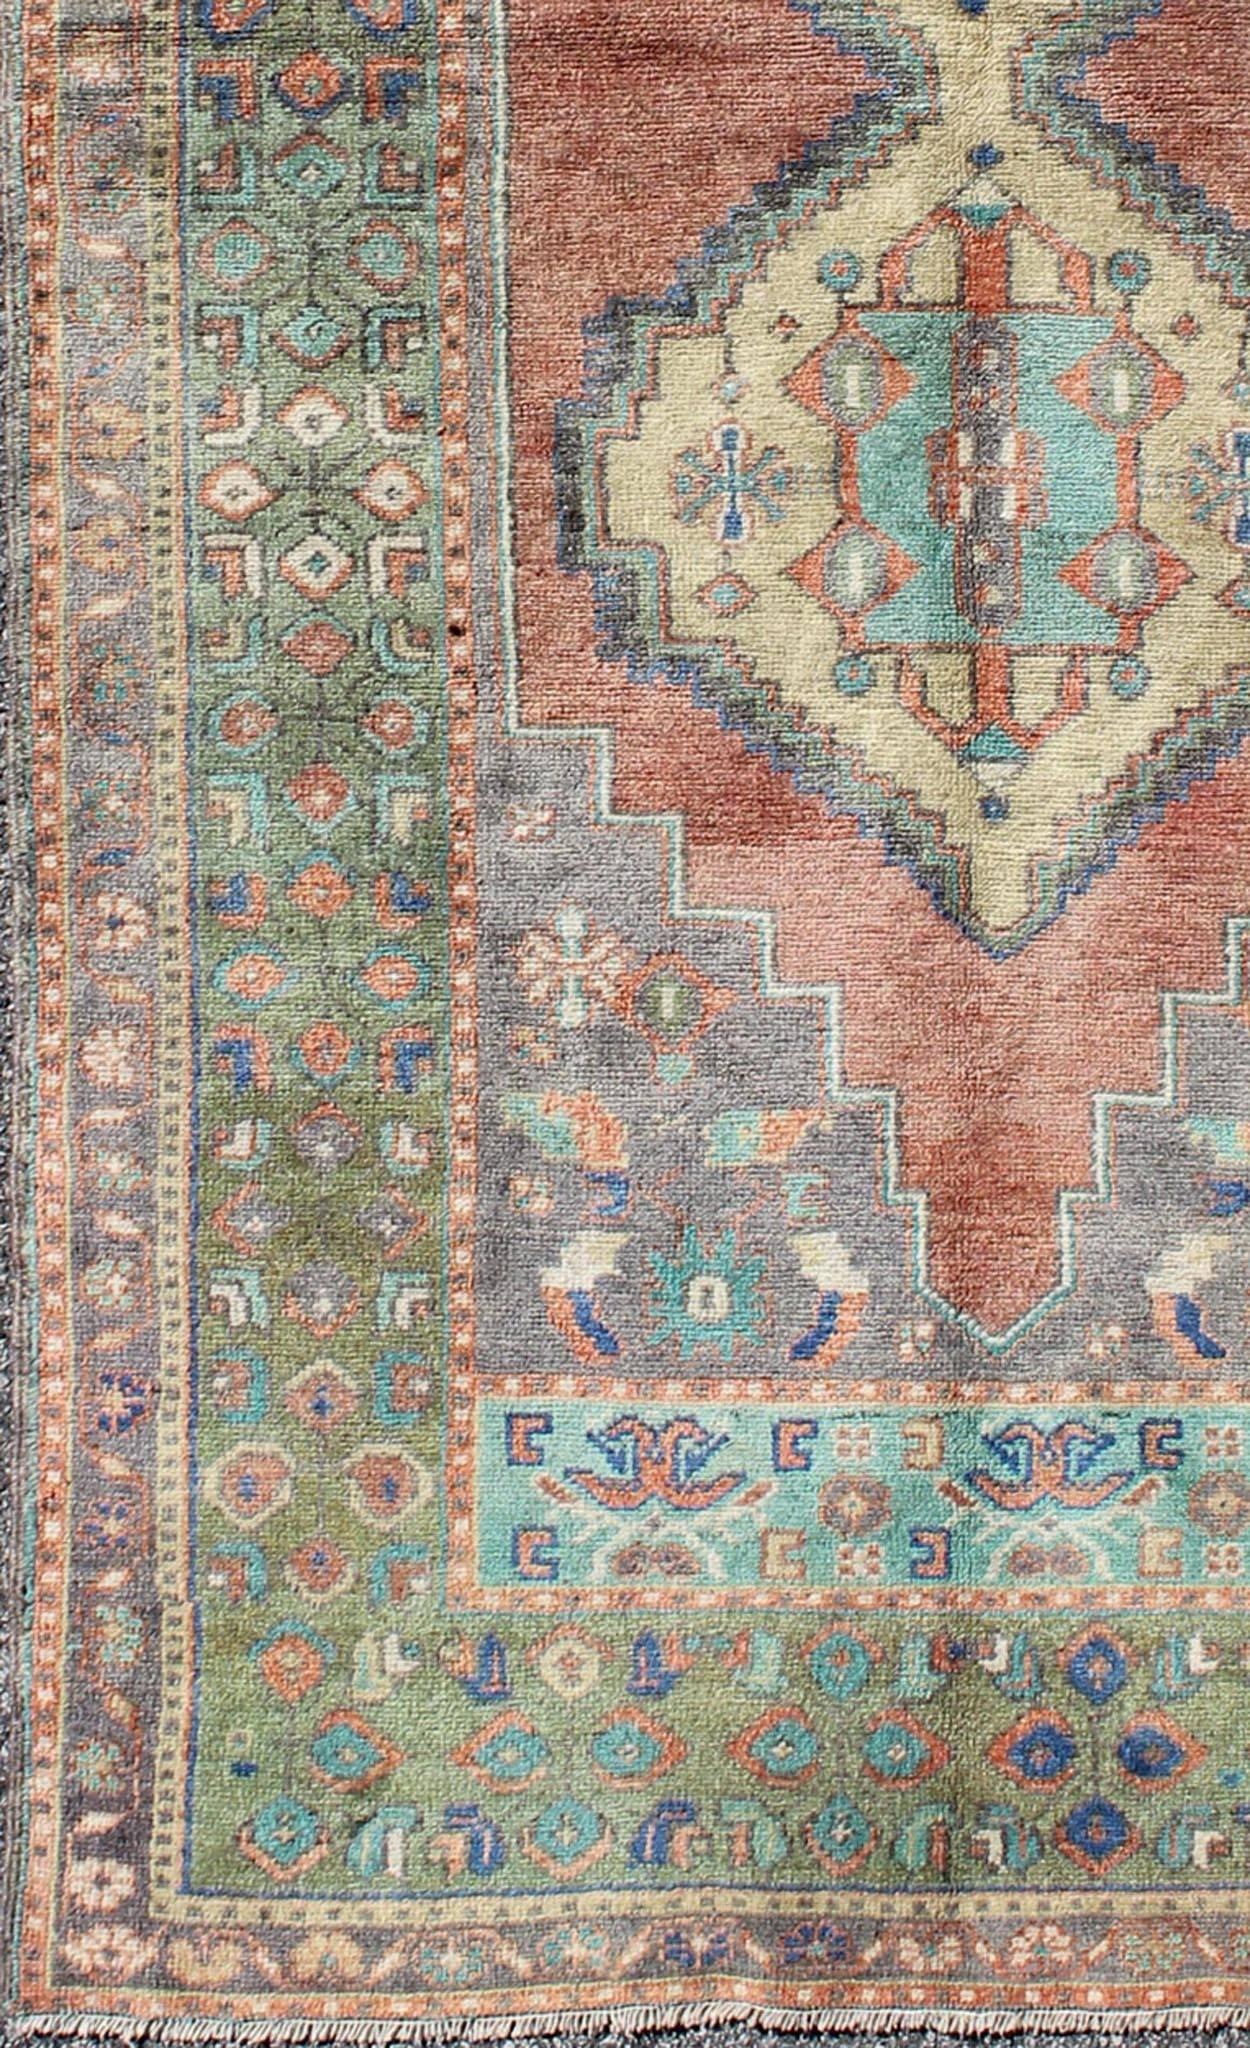 Green and orange Turkish Oushak rug vintage dual diamond medallions, rug tu-en-140417, country of origin / type: Turkey / Oushak, circa 1940

This vintage Turkish Oushak carpet (circa mid-20th century) features a central dual-medallion design, as